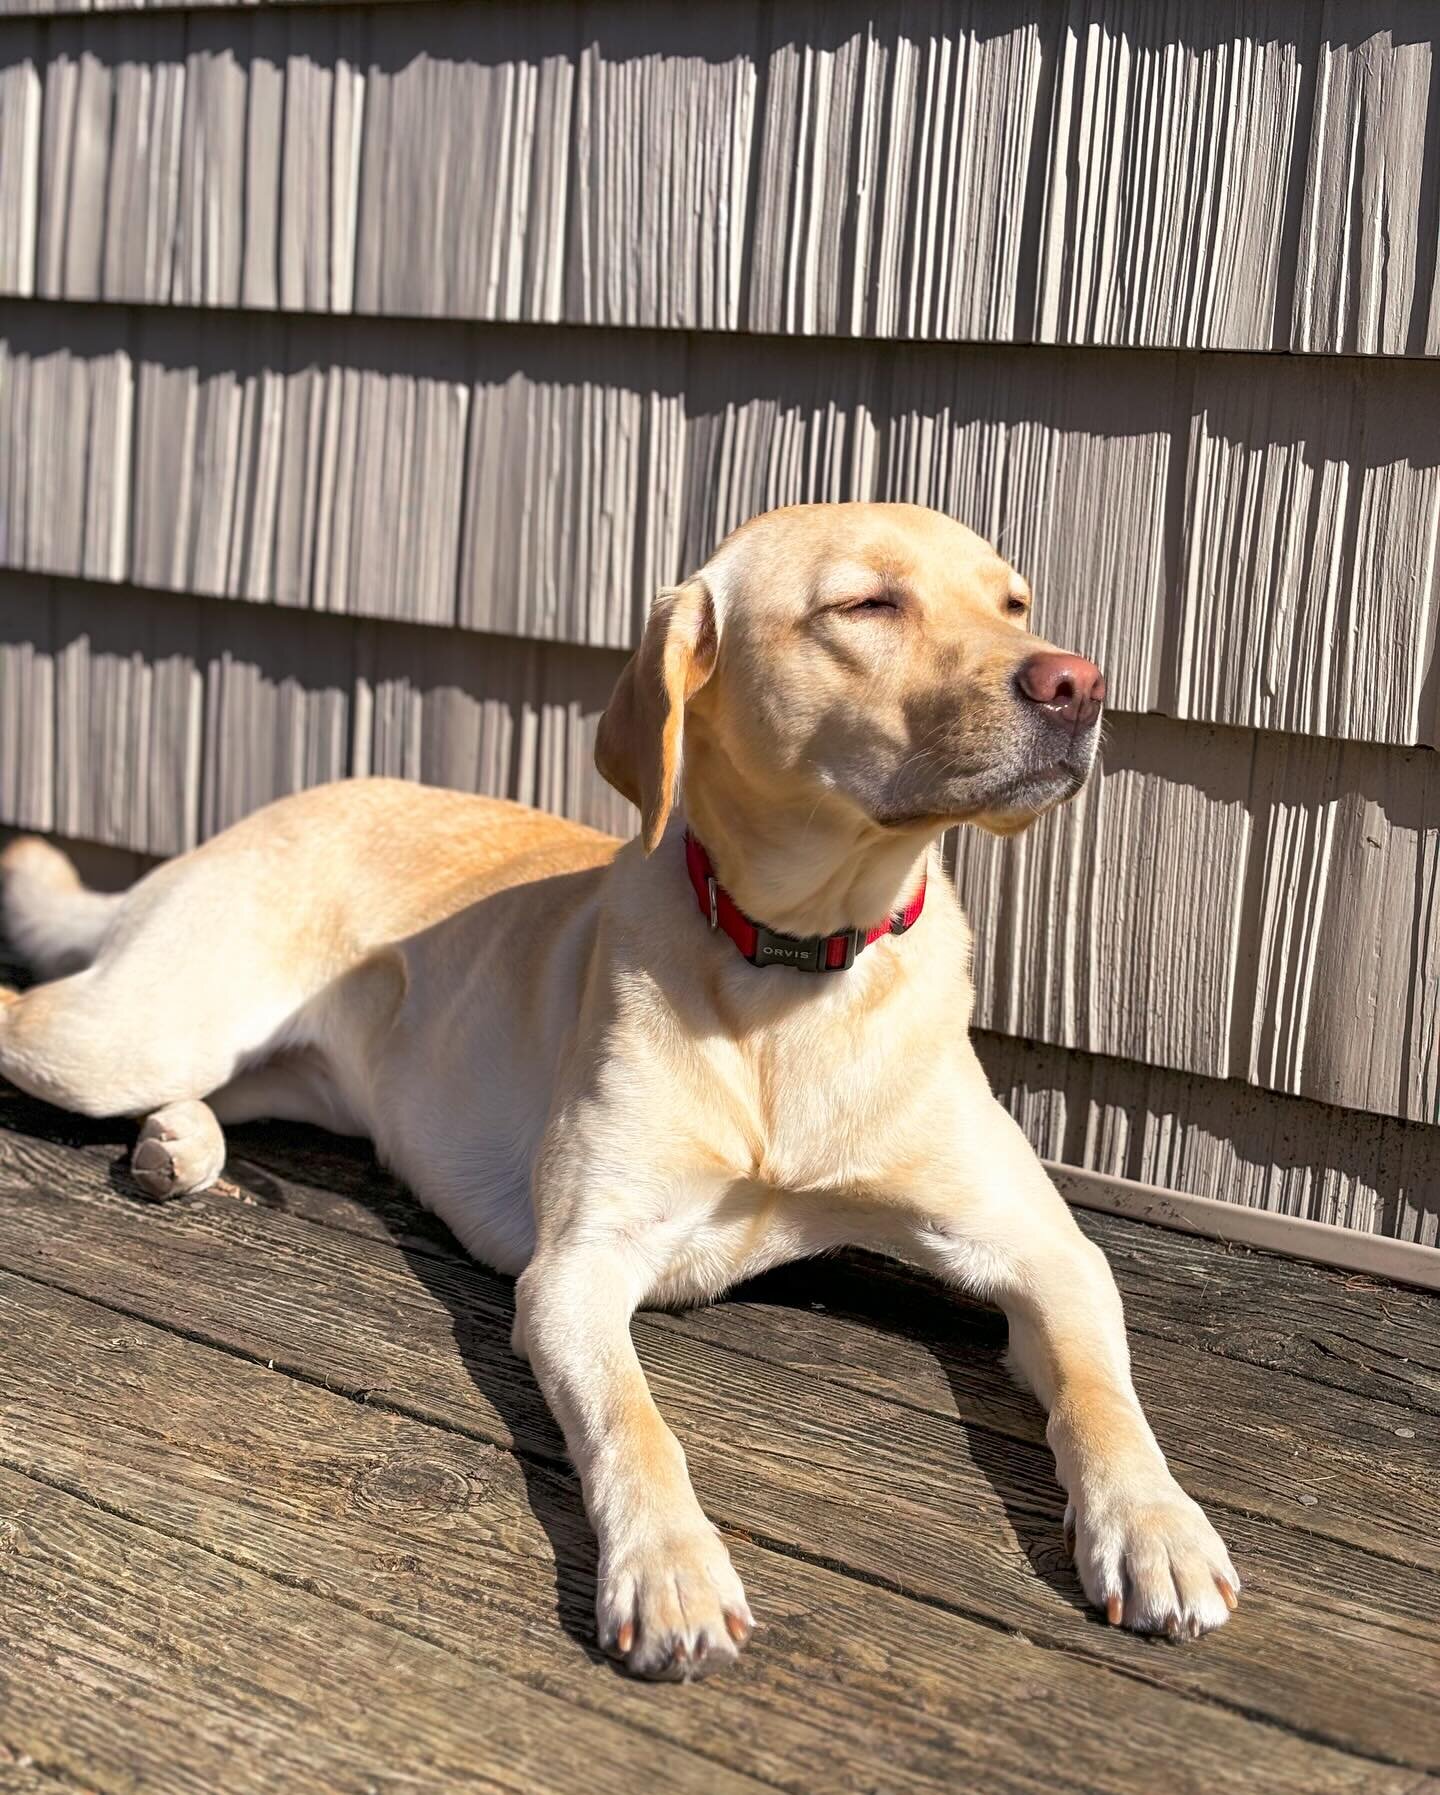 Lunie&lsquo;s turn; except she&rsquo;s dreaming of the detached mouse tail she brought inside the other night that made us want to vom. 🫣

#labsofinstagram #springtime #yellowlab #pup